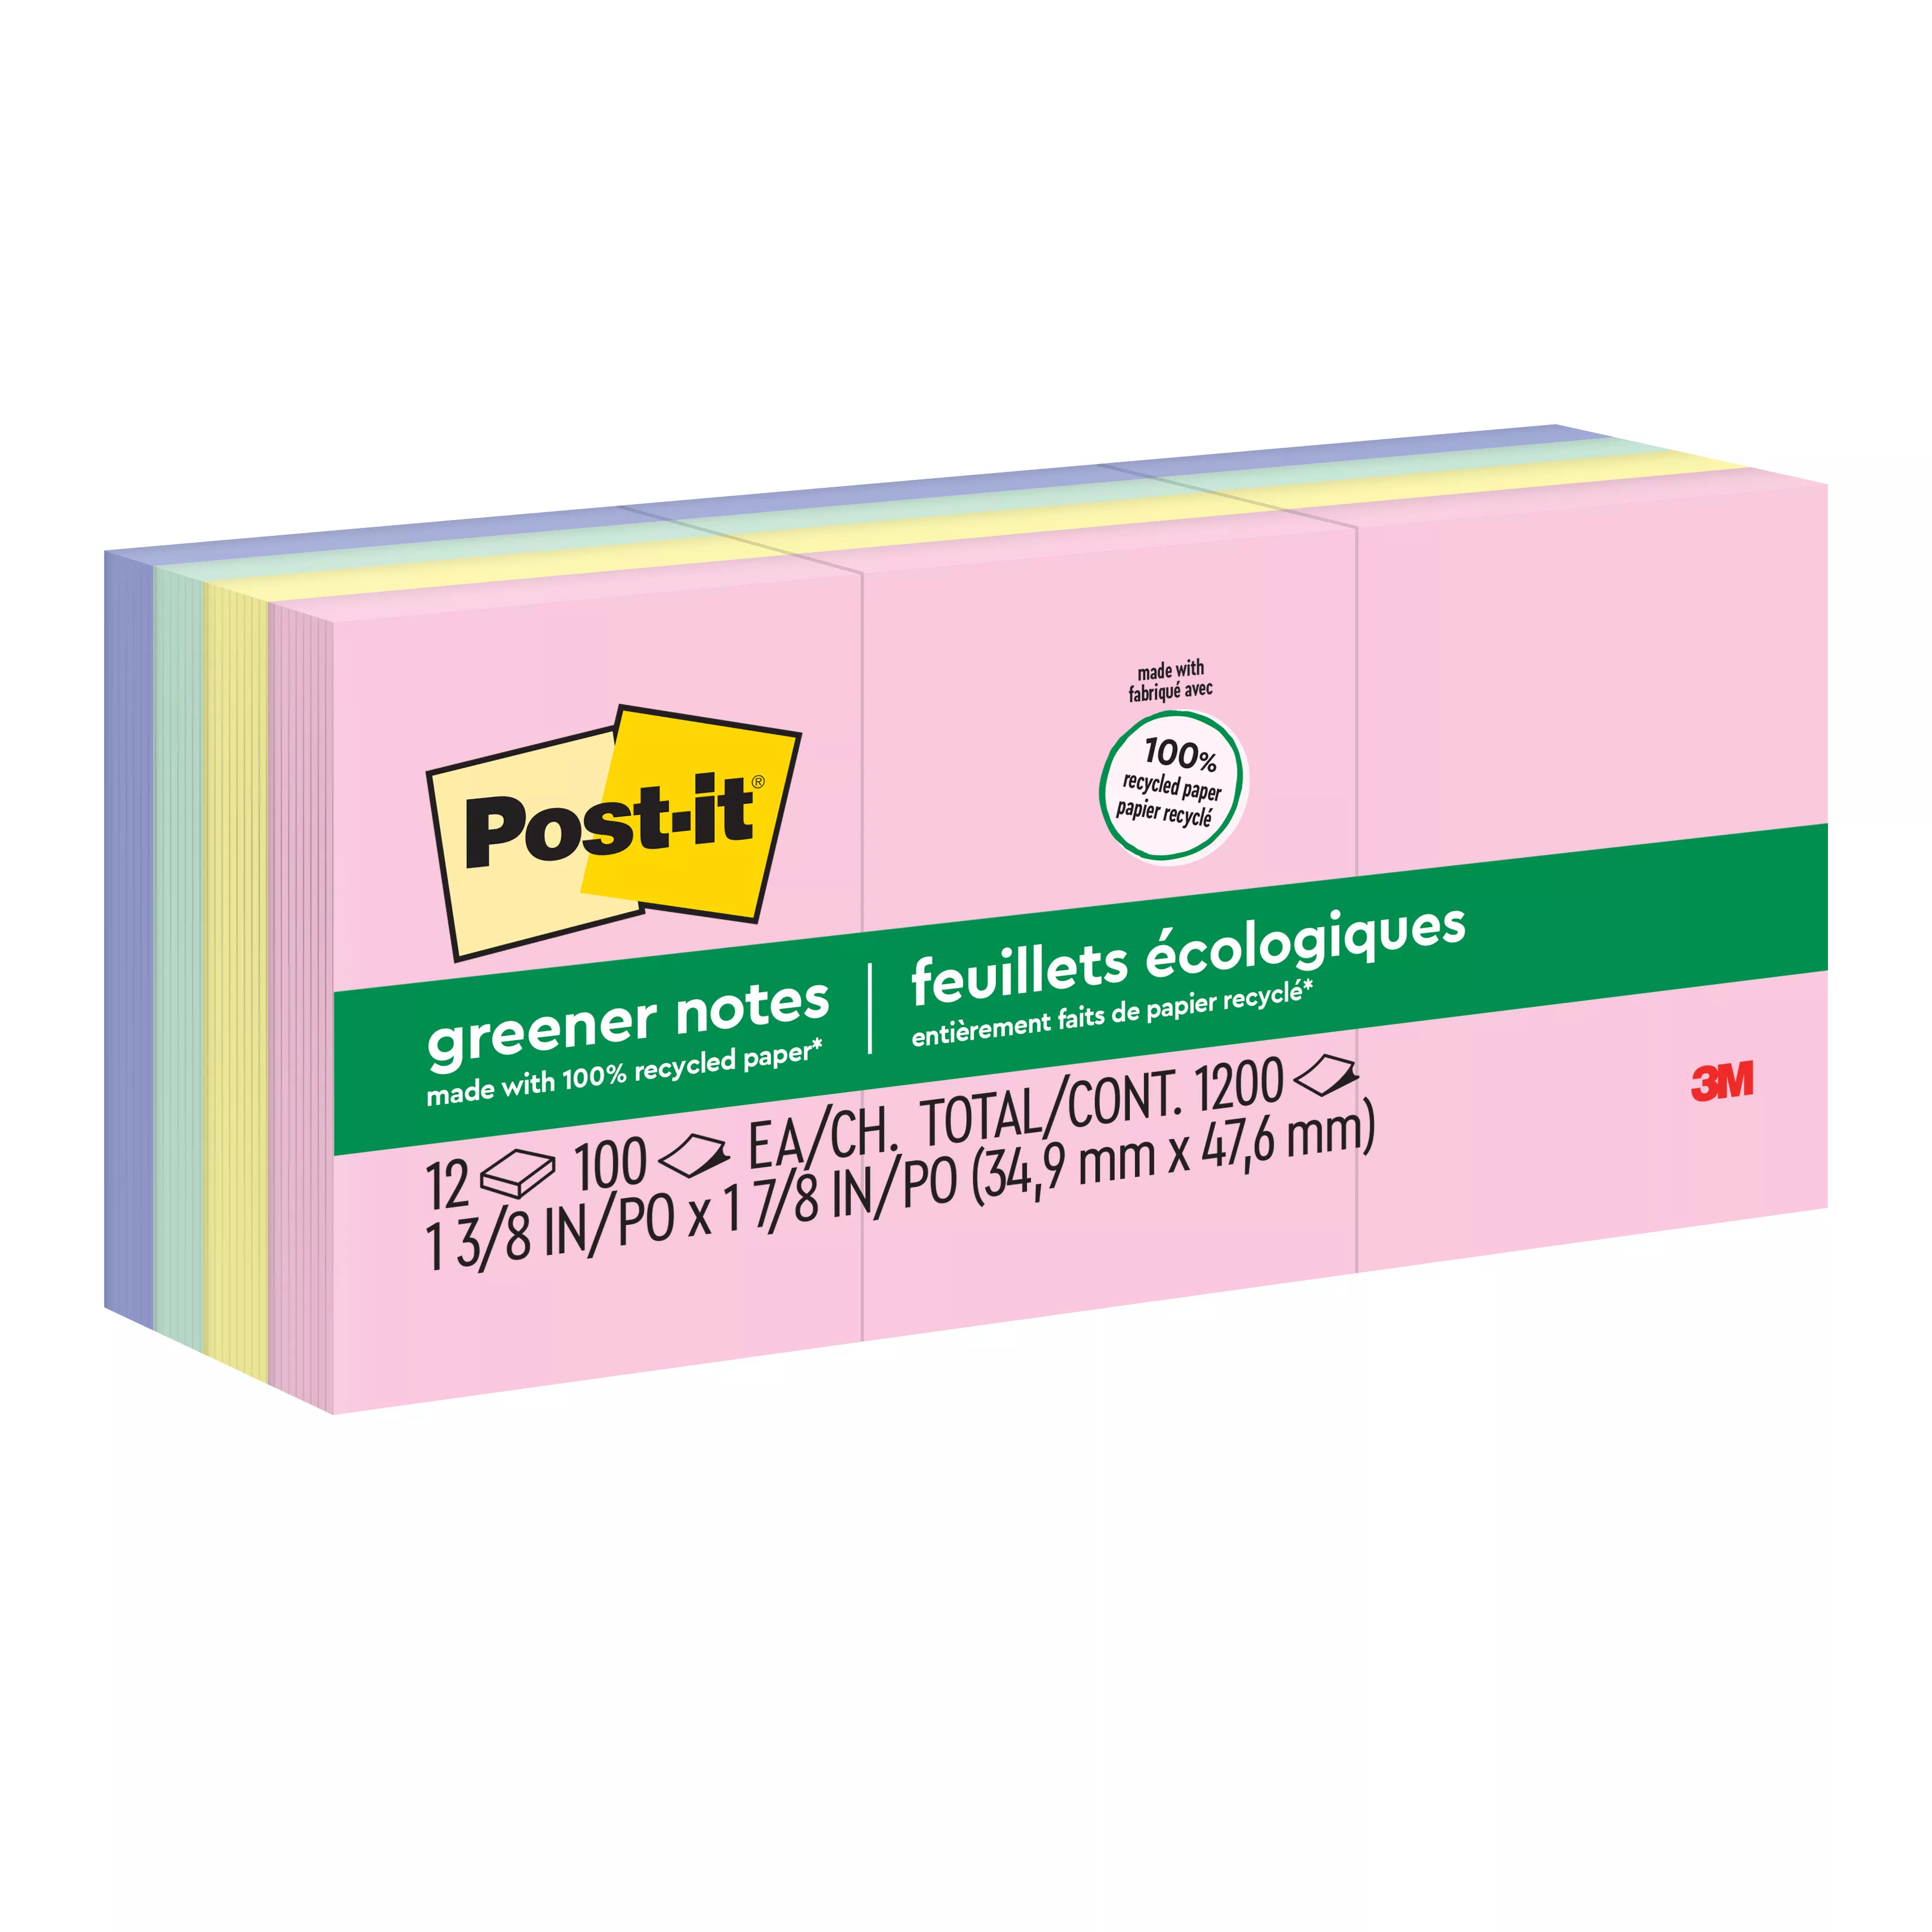 Post-it® Greener Notes 653-RP-A, 1 3/8 in x 1 7/8 in (34.9 mm x 47.6 mm), Helsinki colors